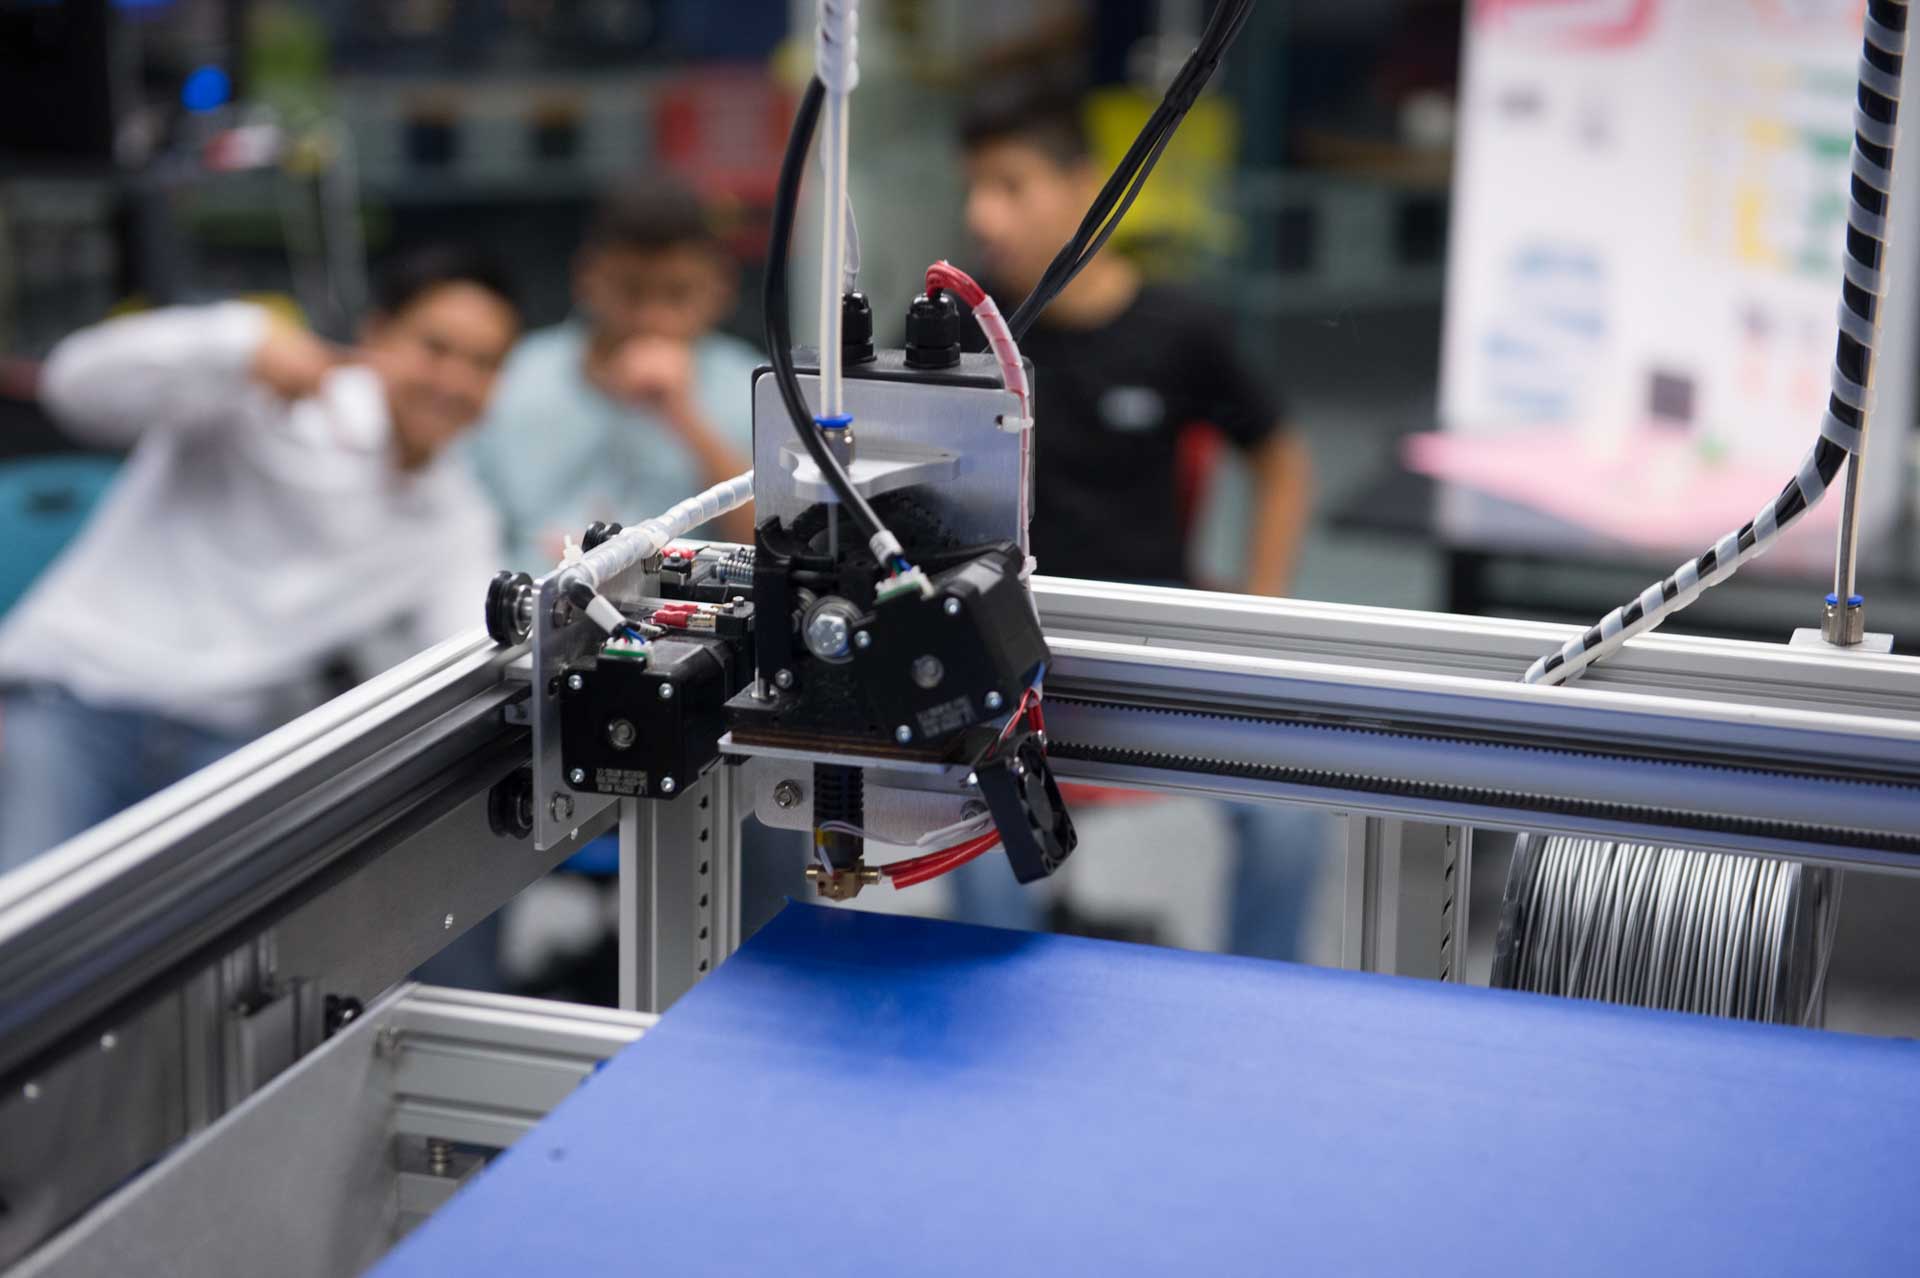 A 3d printer in the foreground, with students posing in the background